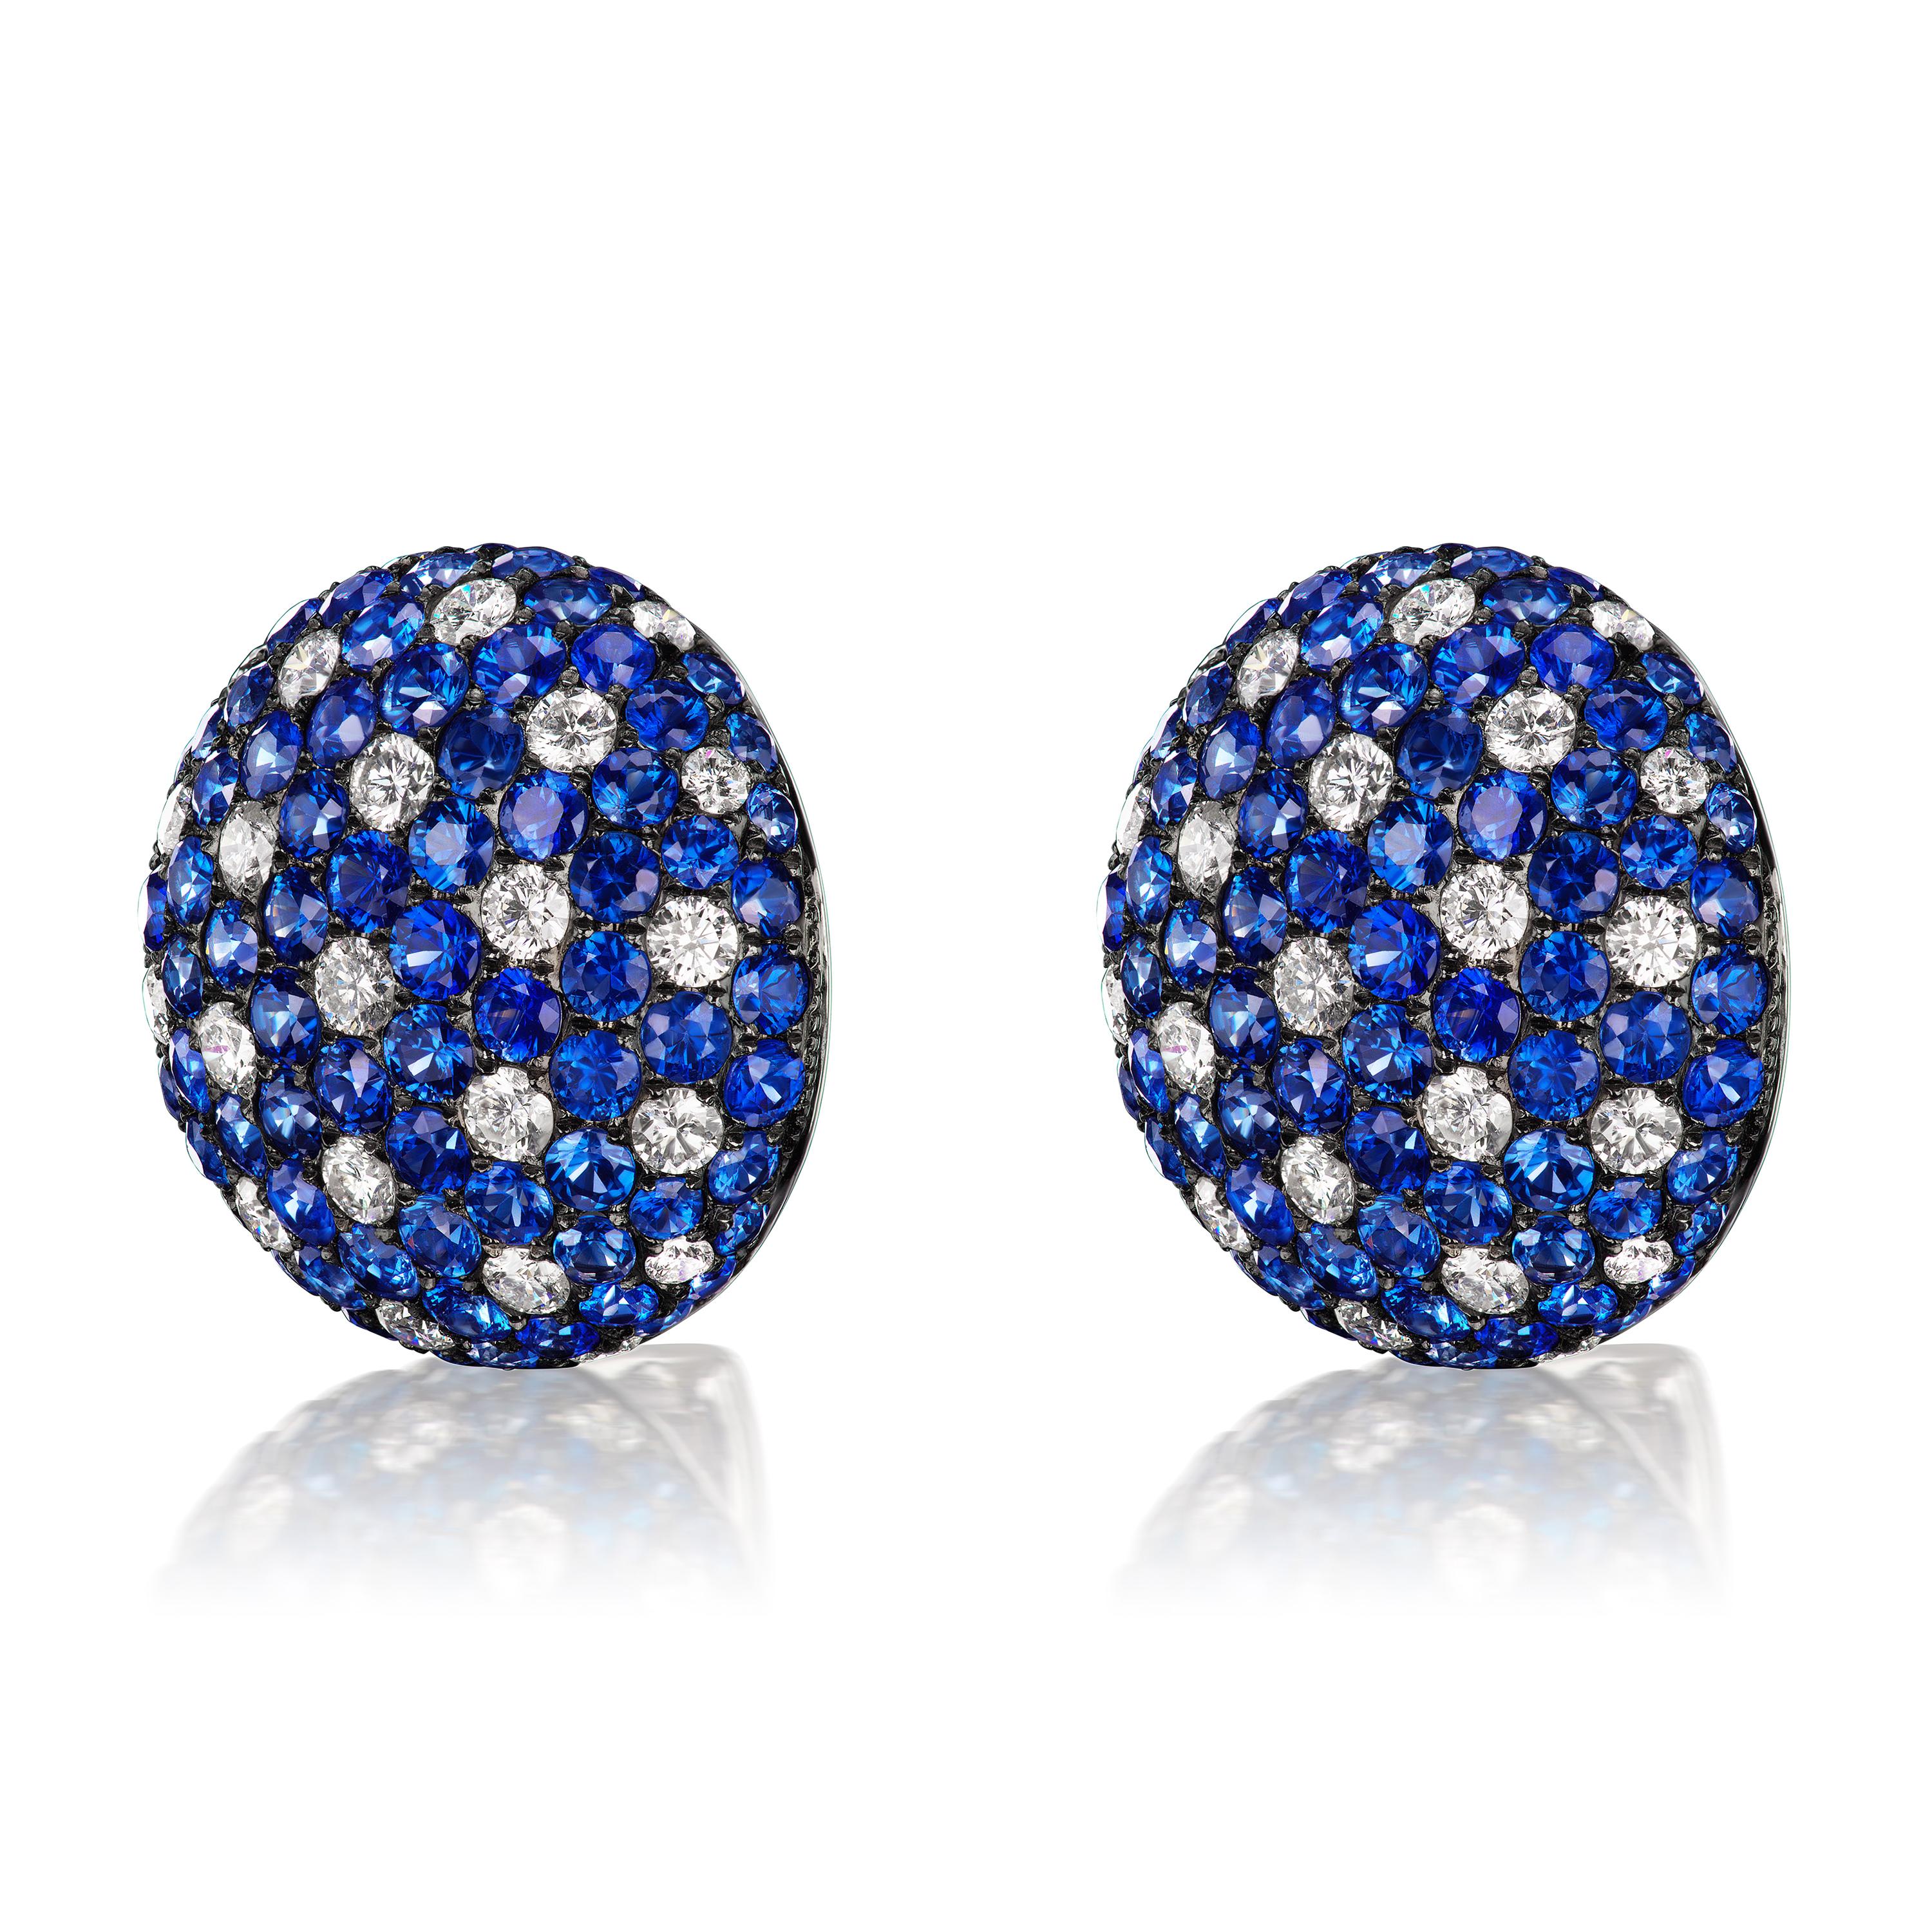 The gorgeous stud earring created by Nigaam in a stunning circle frame made of 18 karat white gold plated in black rhodium and set with a 7.84 carat round blue sapphire and a 2.01 carat round diamond. The earring's overall appeal is enhanced by its